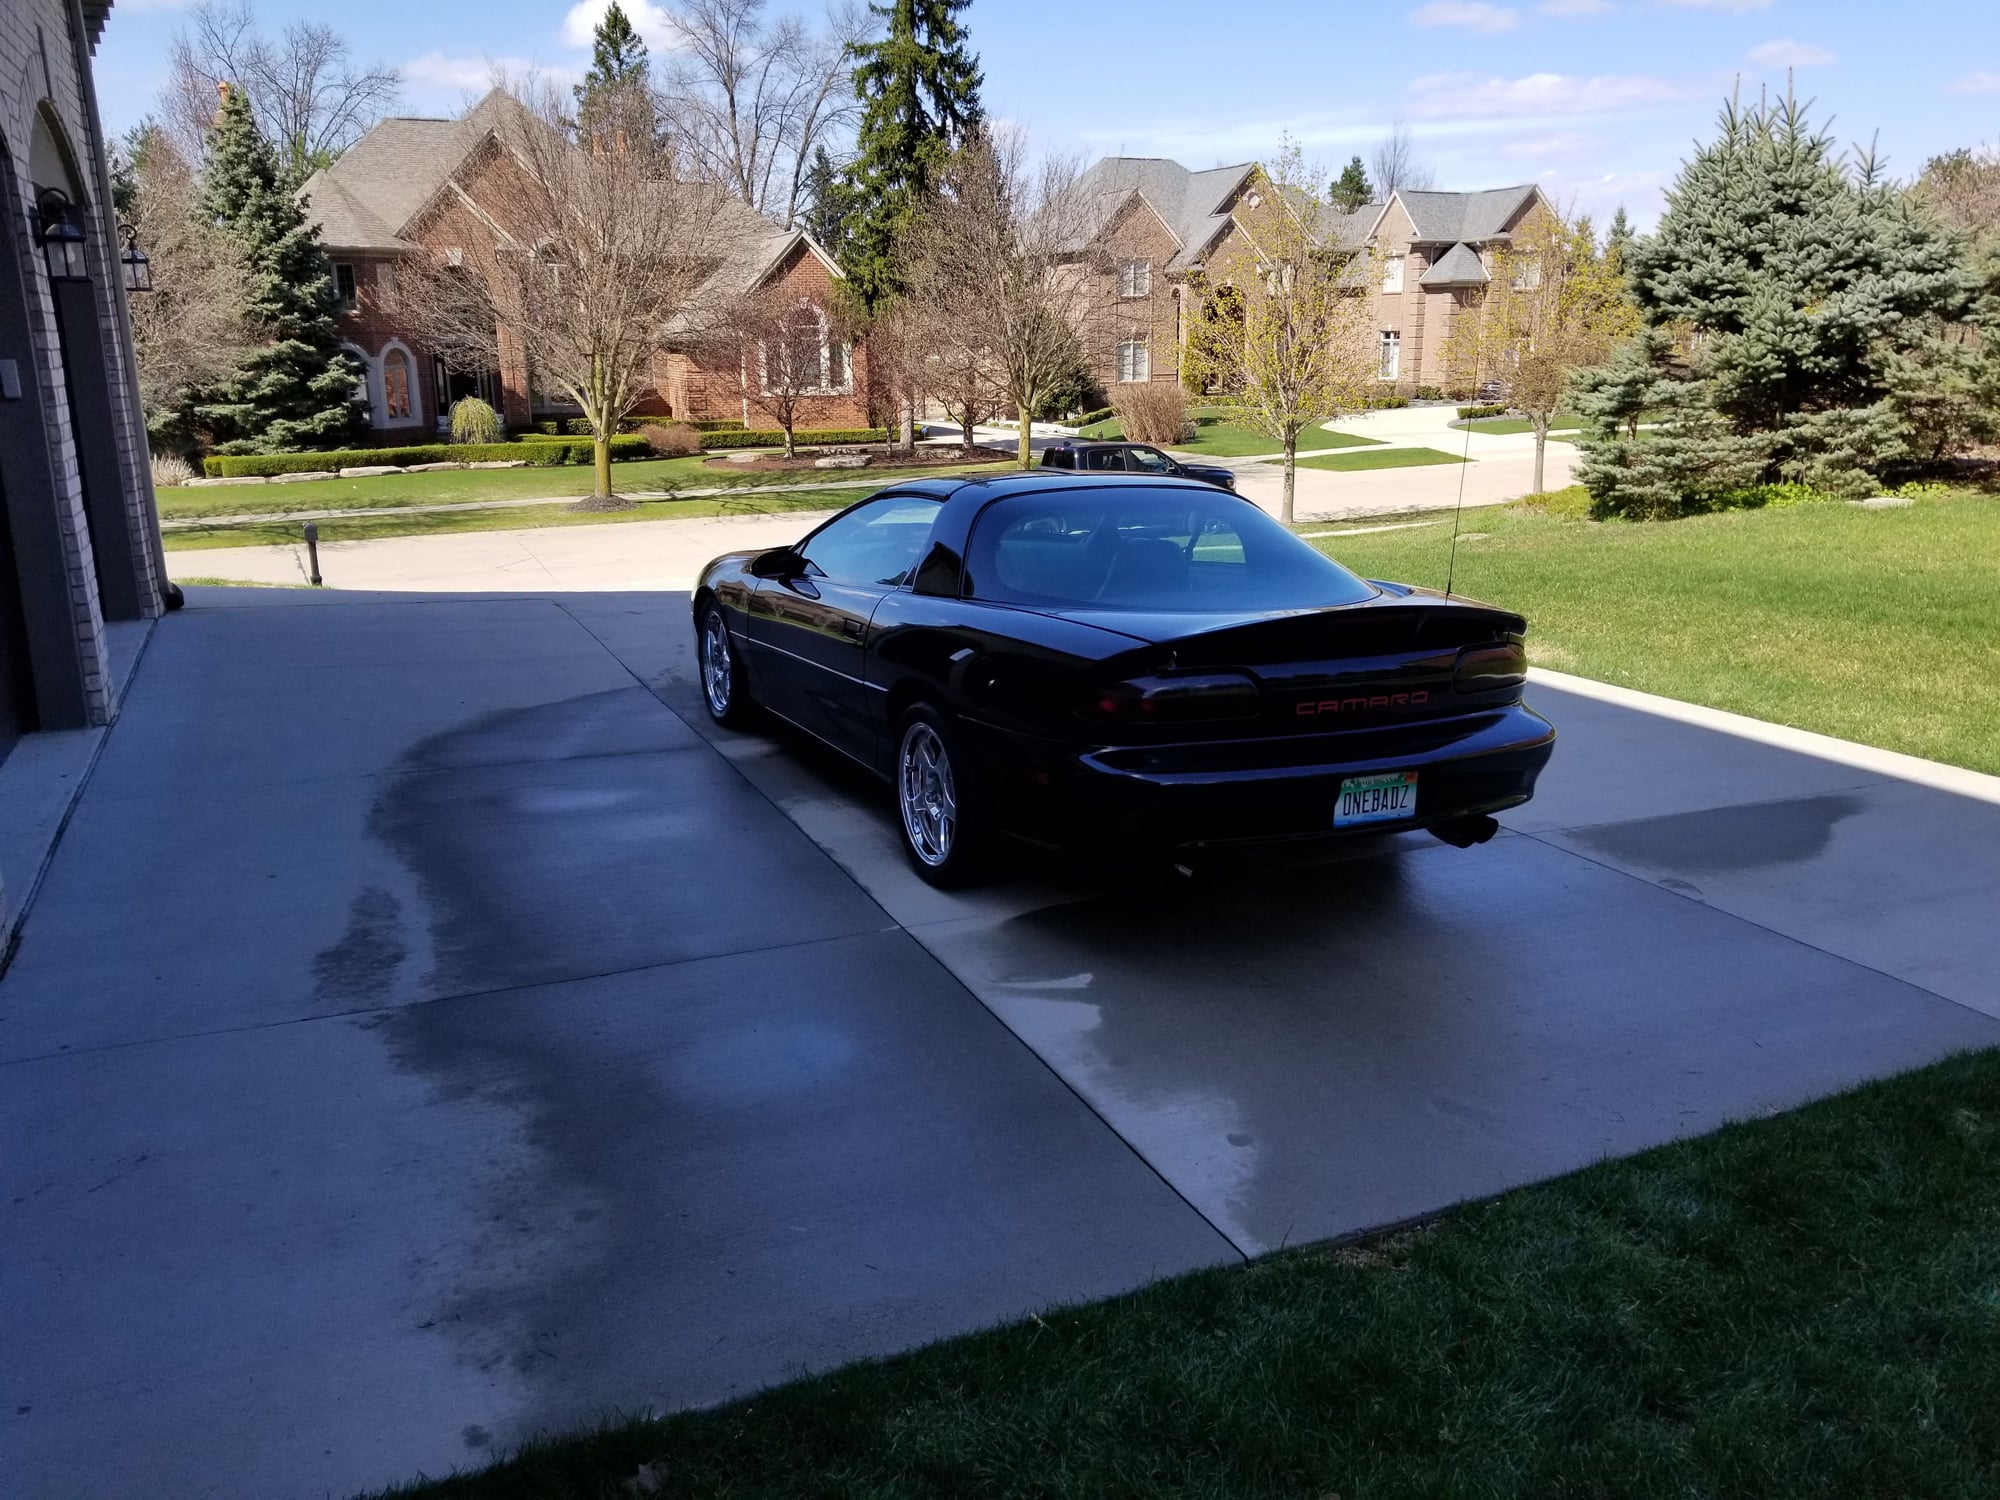 1999 Chevrolet Camaro - 99 Z28 408, 4L80E, 9" Rear, Tons more (Prepped for Twin Turbo) - Used - VIN 2G1FP22GXX2119462 - 49,282 Miles - 8 cyl - 2WD - Automatic - Coupe - Black - Washington, MI 48094, United States